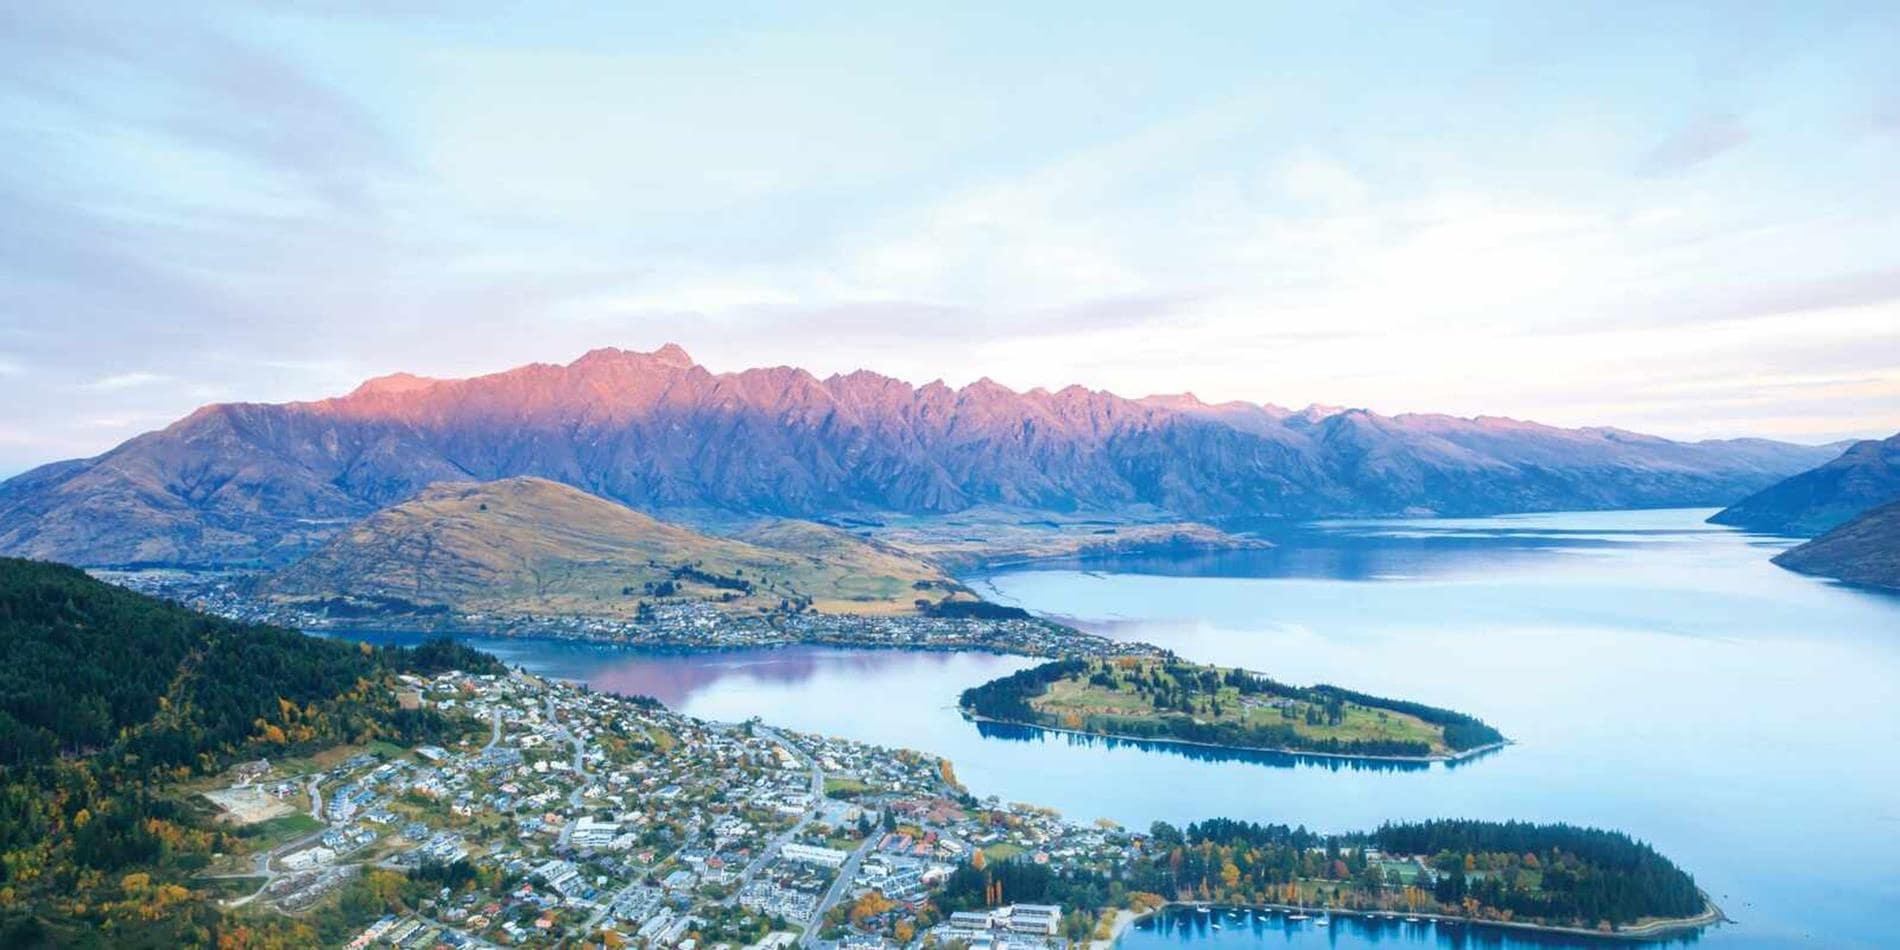 Our go-to guide for food and wine lovers in Queenstown